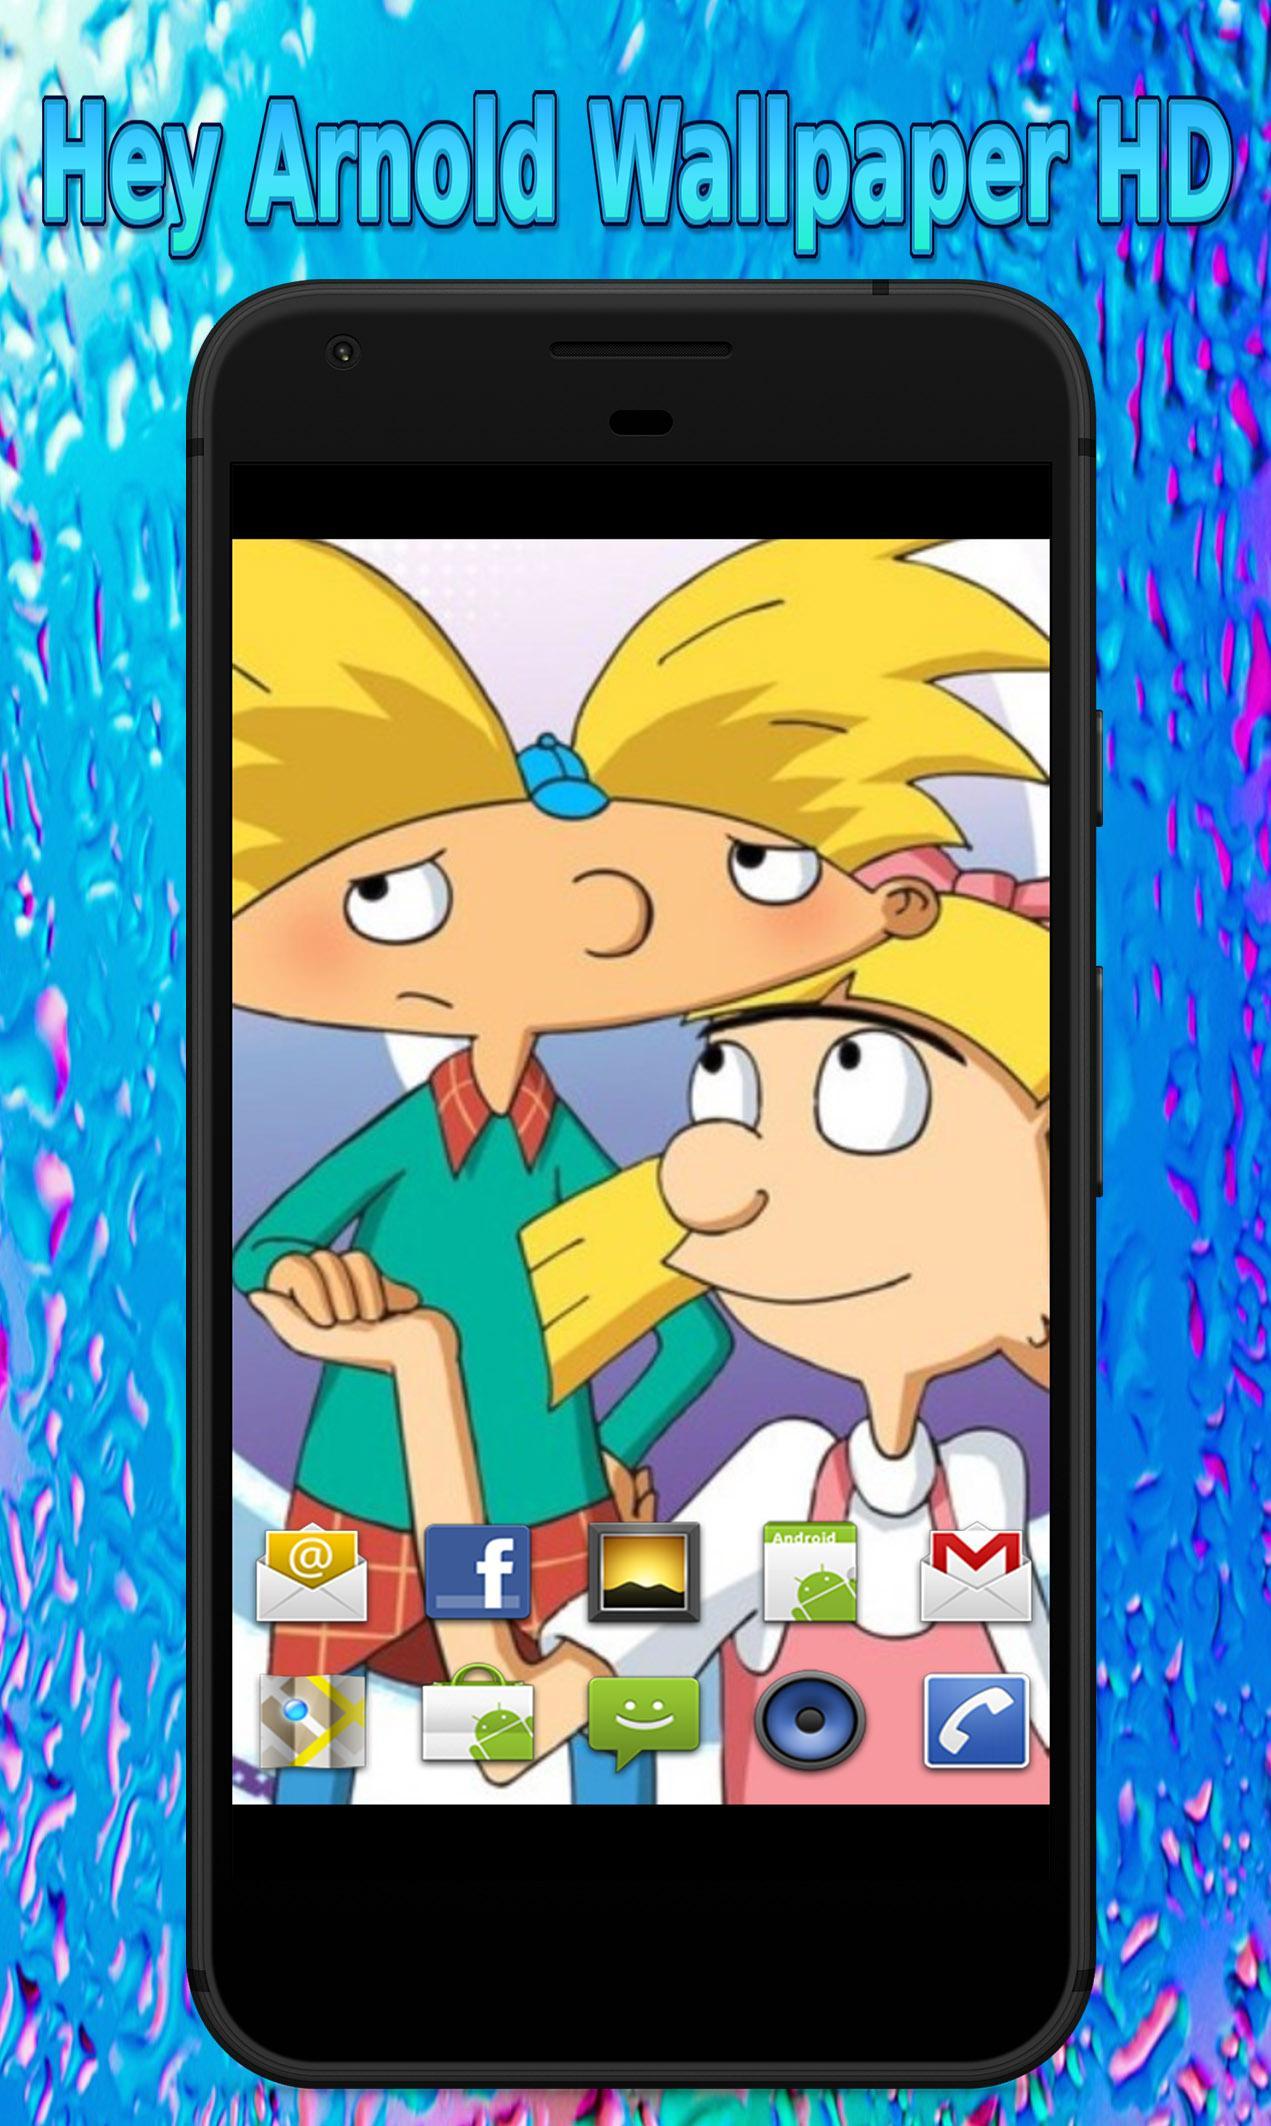 Hey Arnold Wallpaper HD for Android   APK Download